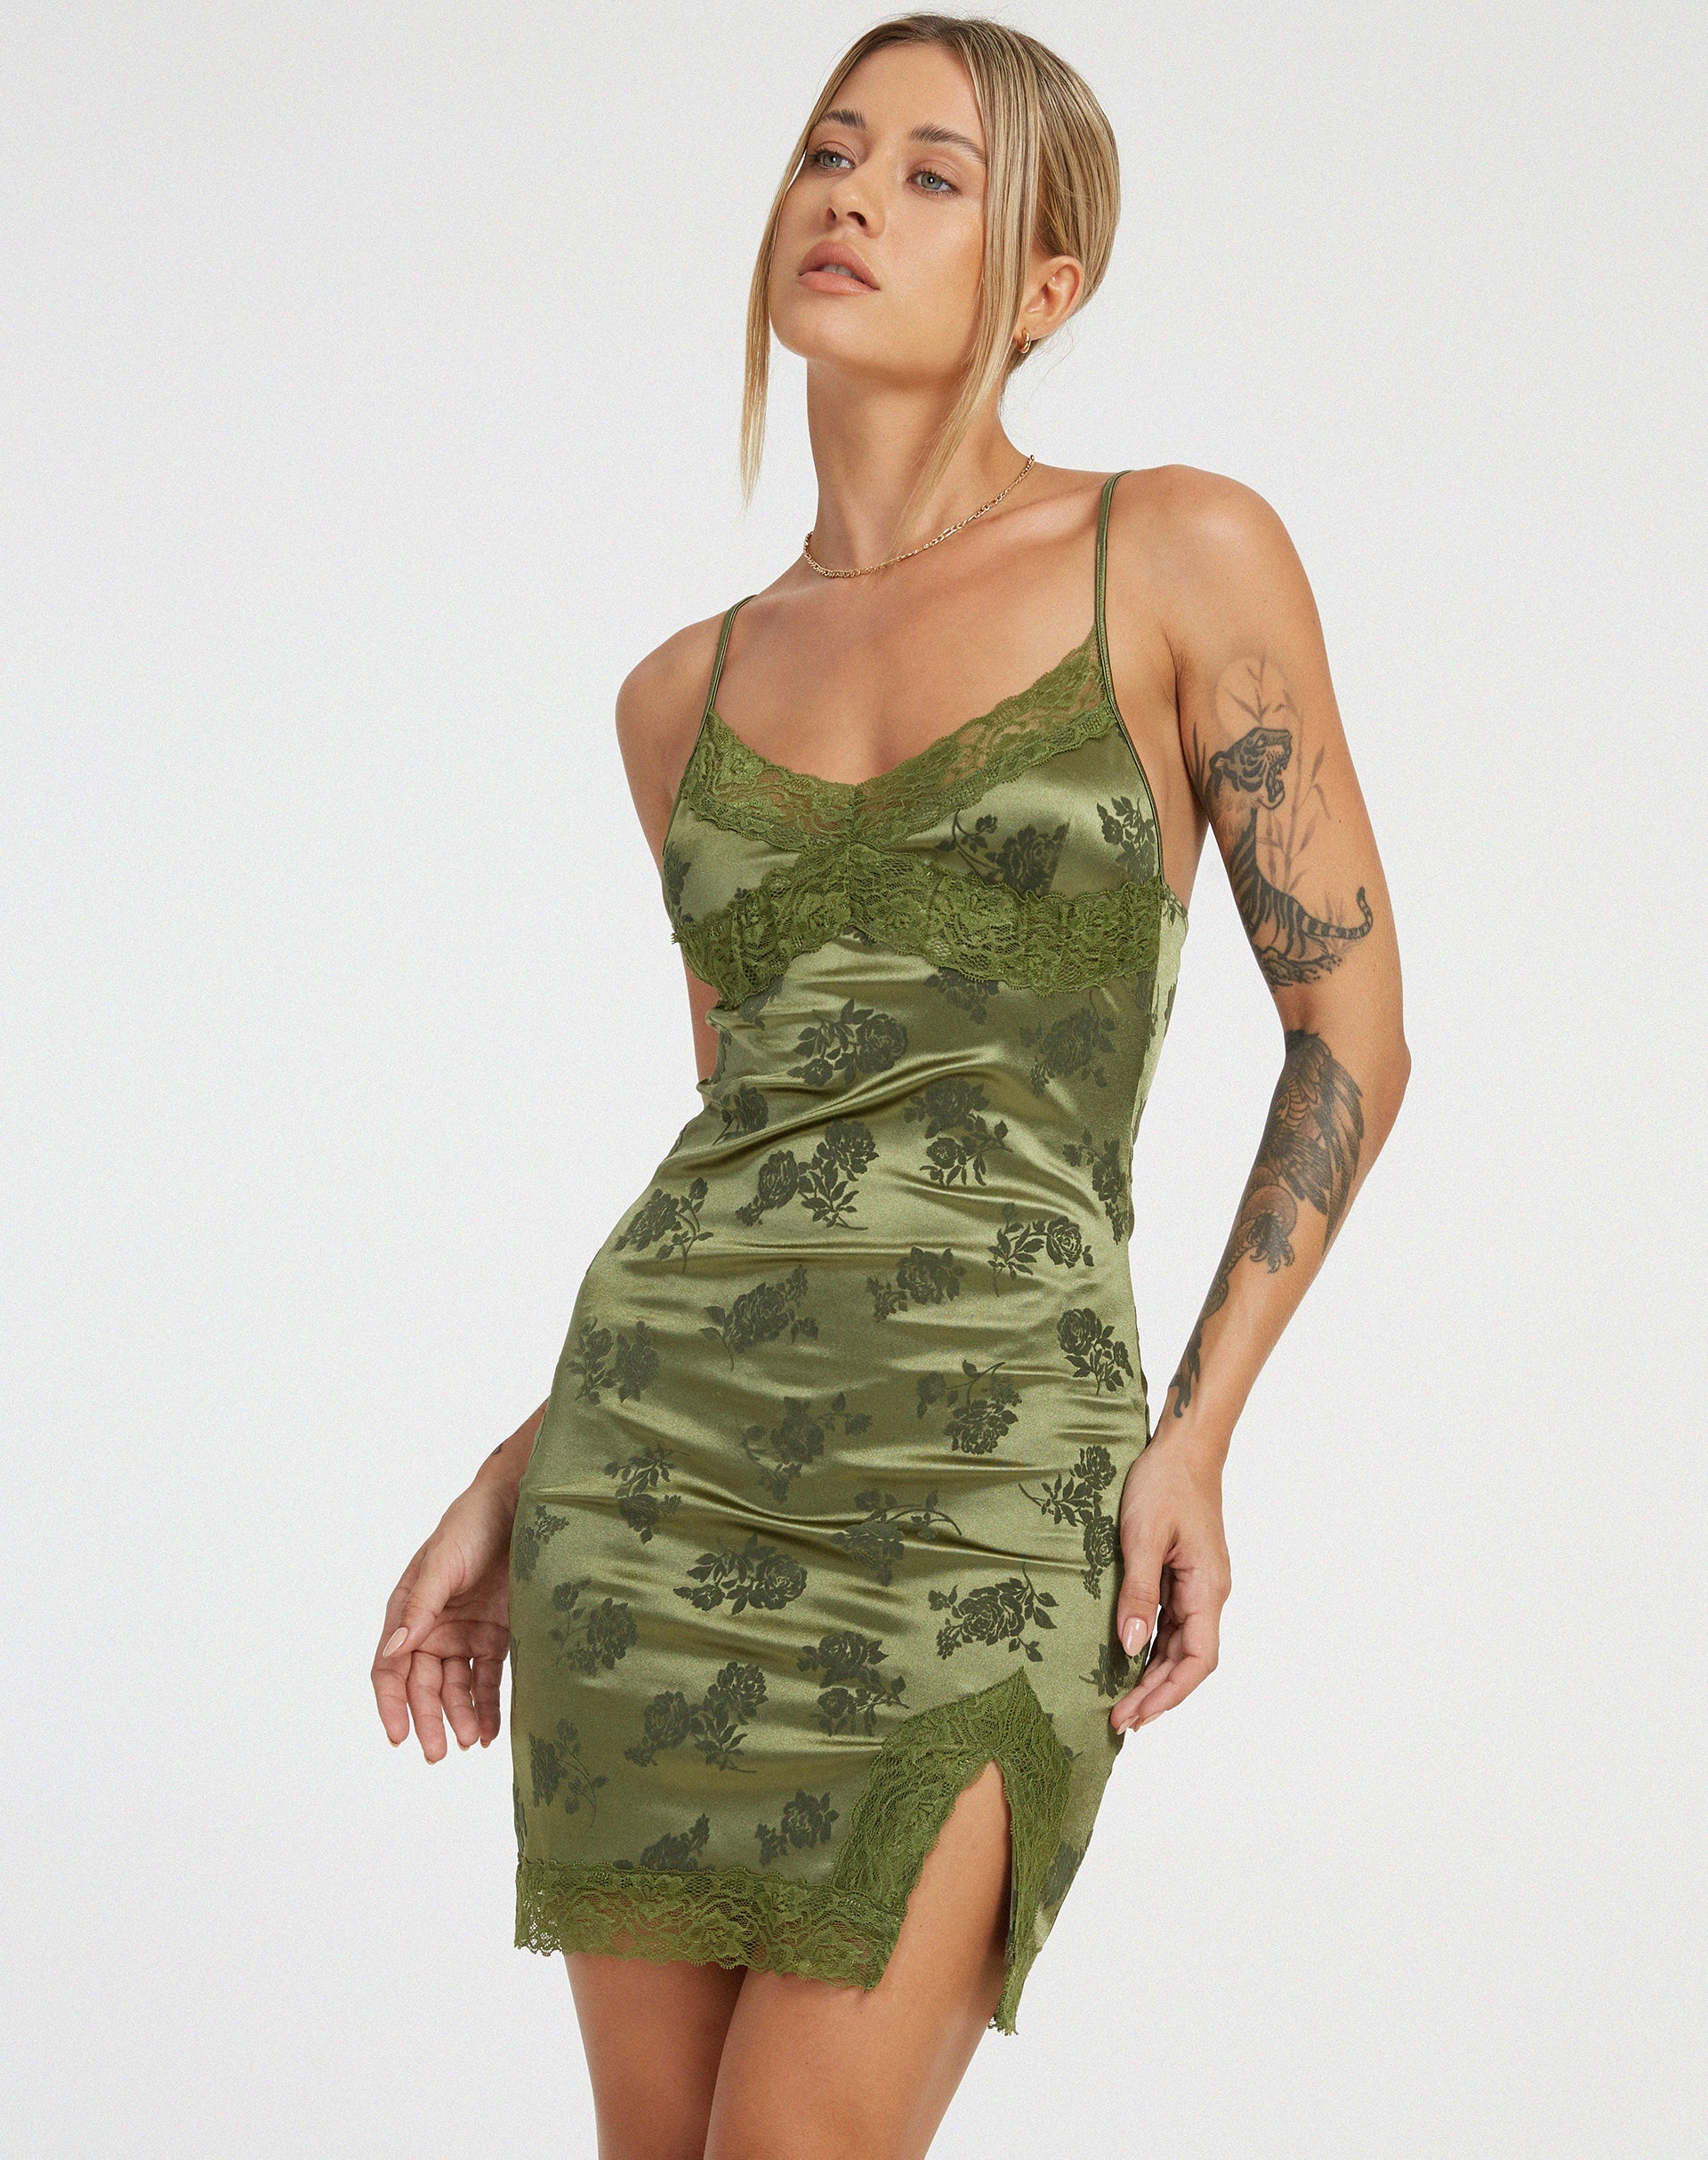 Image of Coti Bodycon Dress in Rose Flock Loden Green